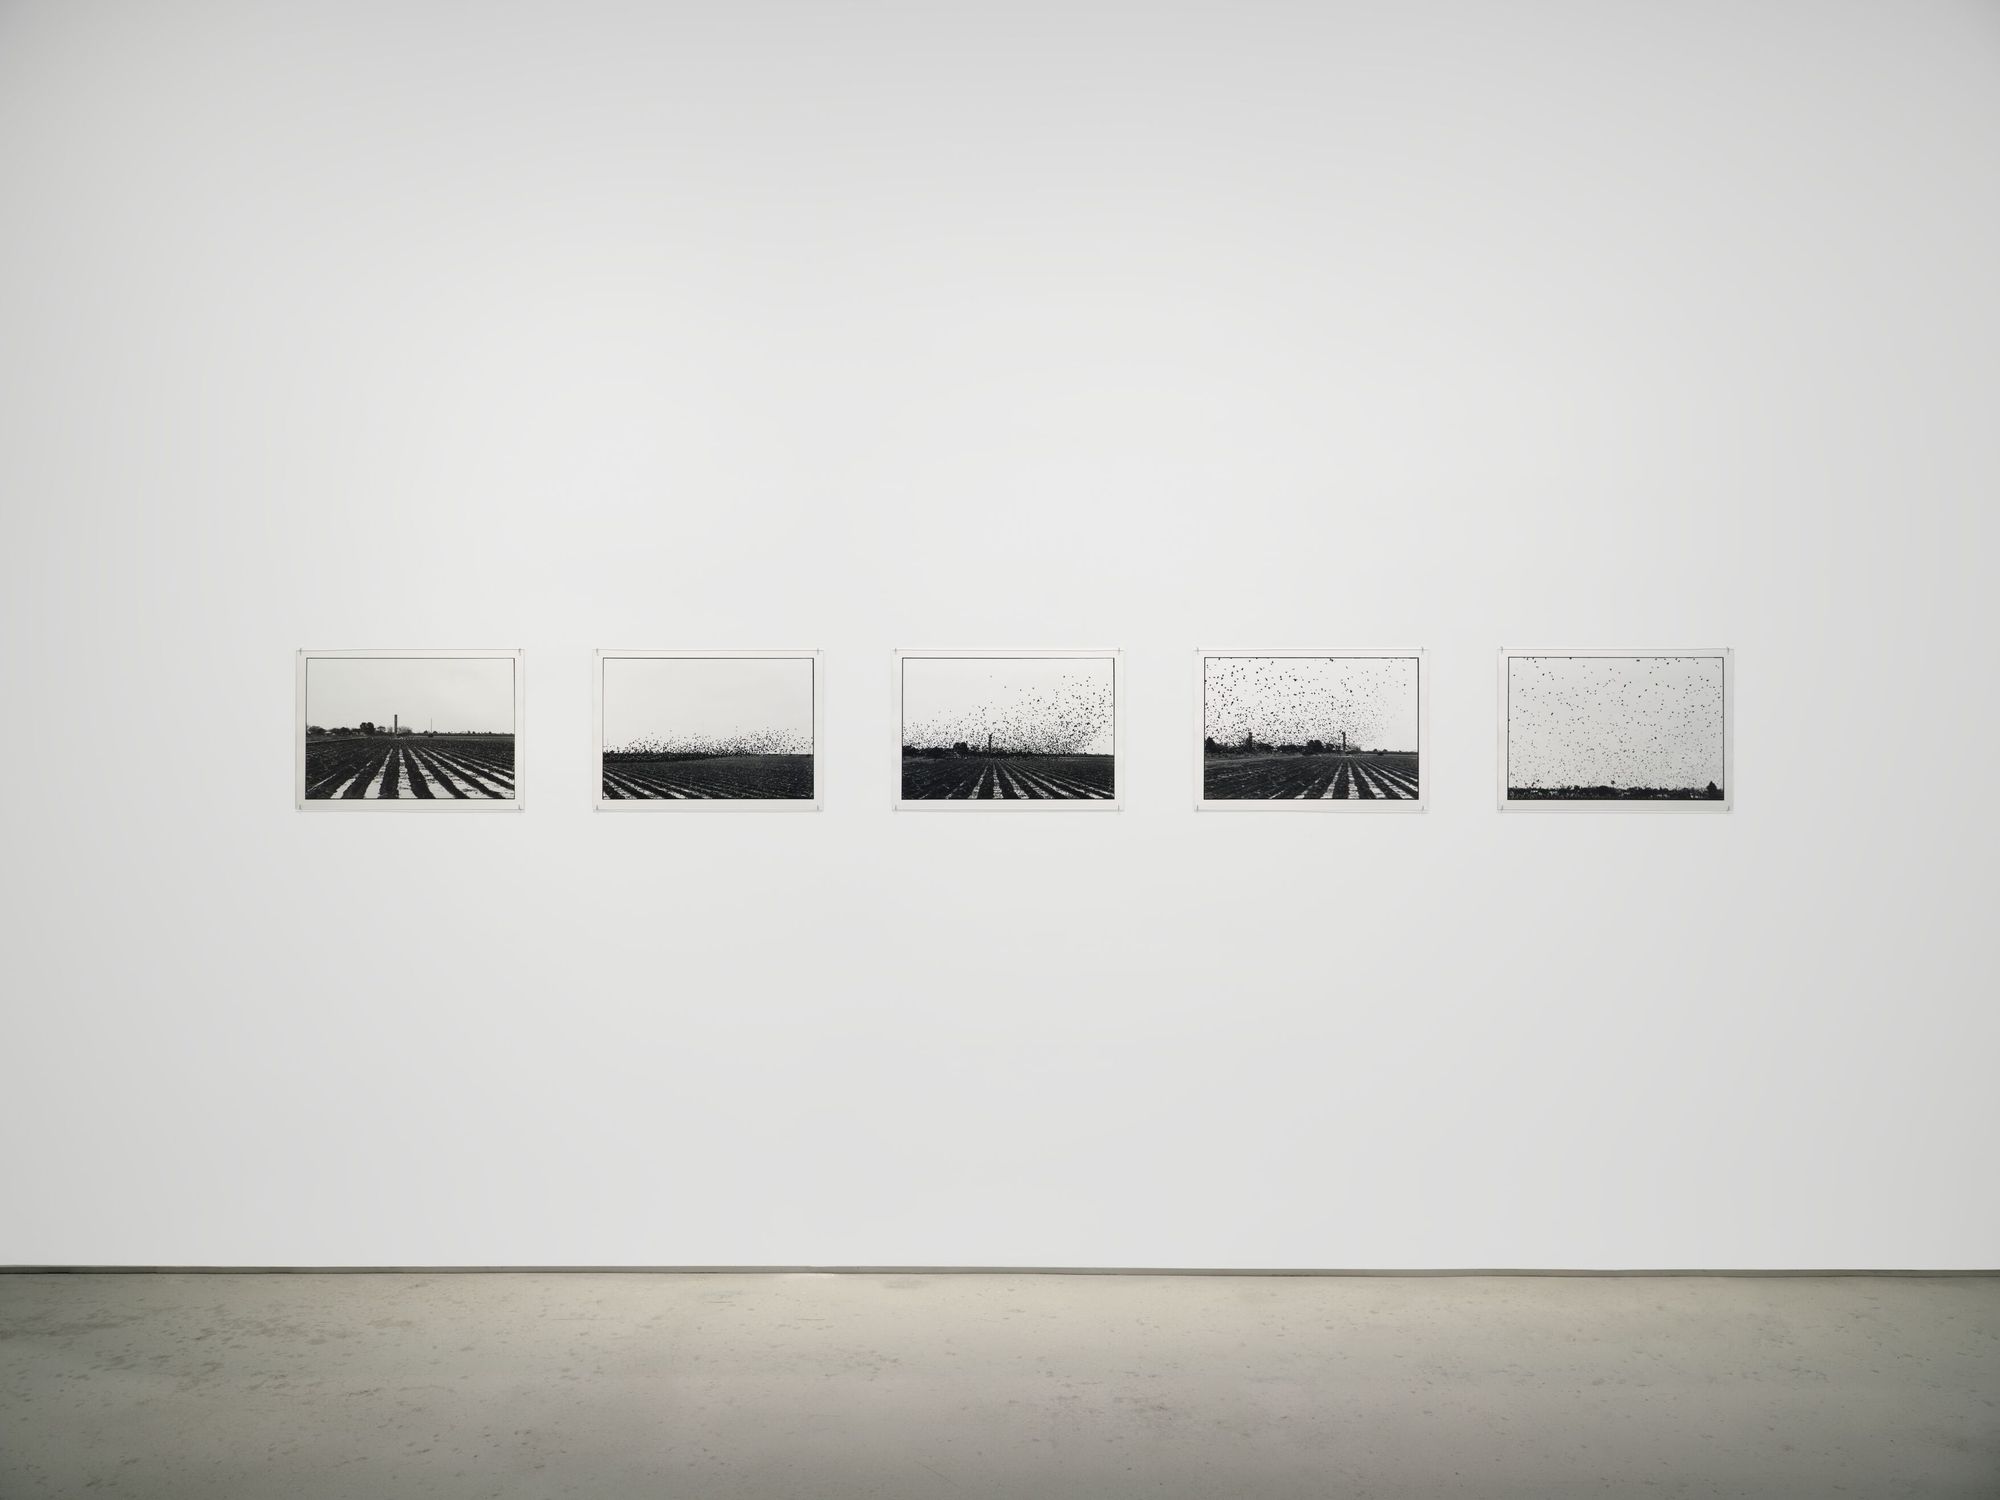 Zoe Leonard, 'Excerpts from ‘Al río / To the River’' at Hauser & Wirth ...